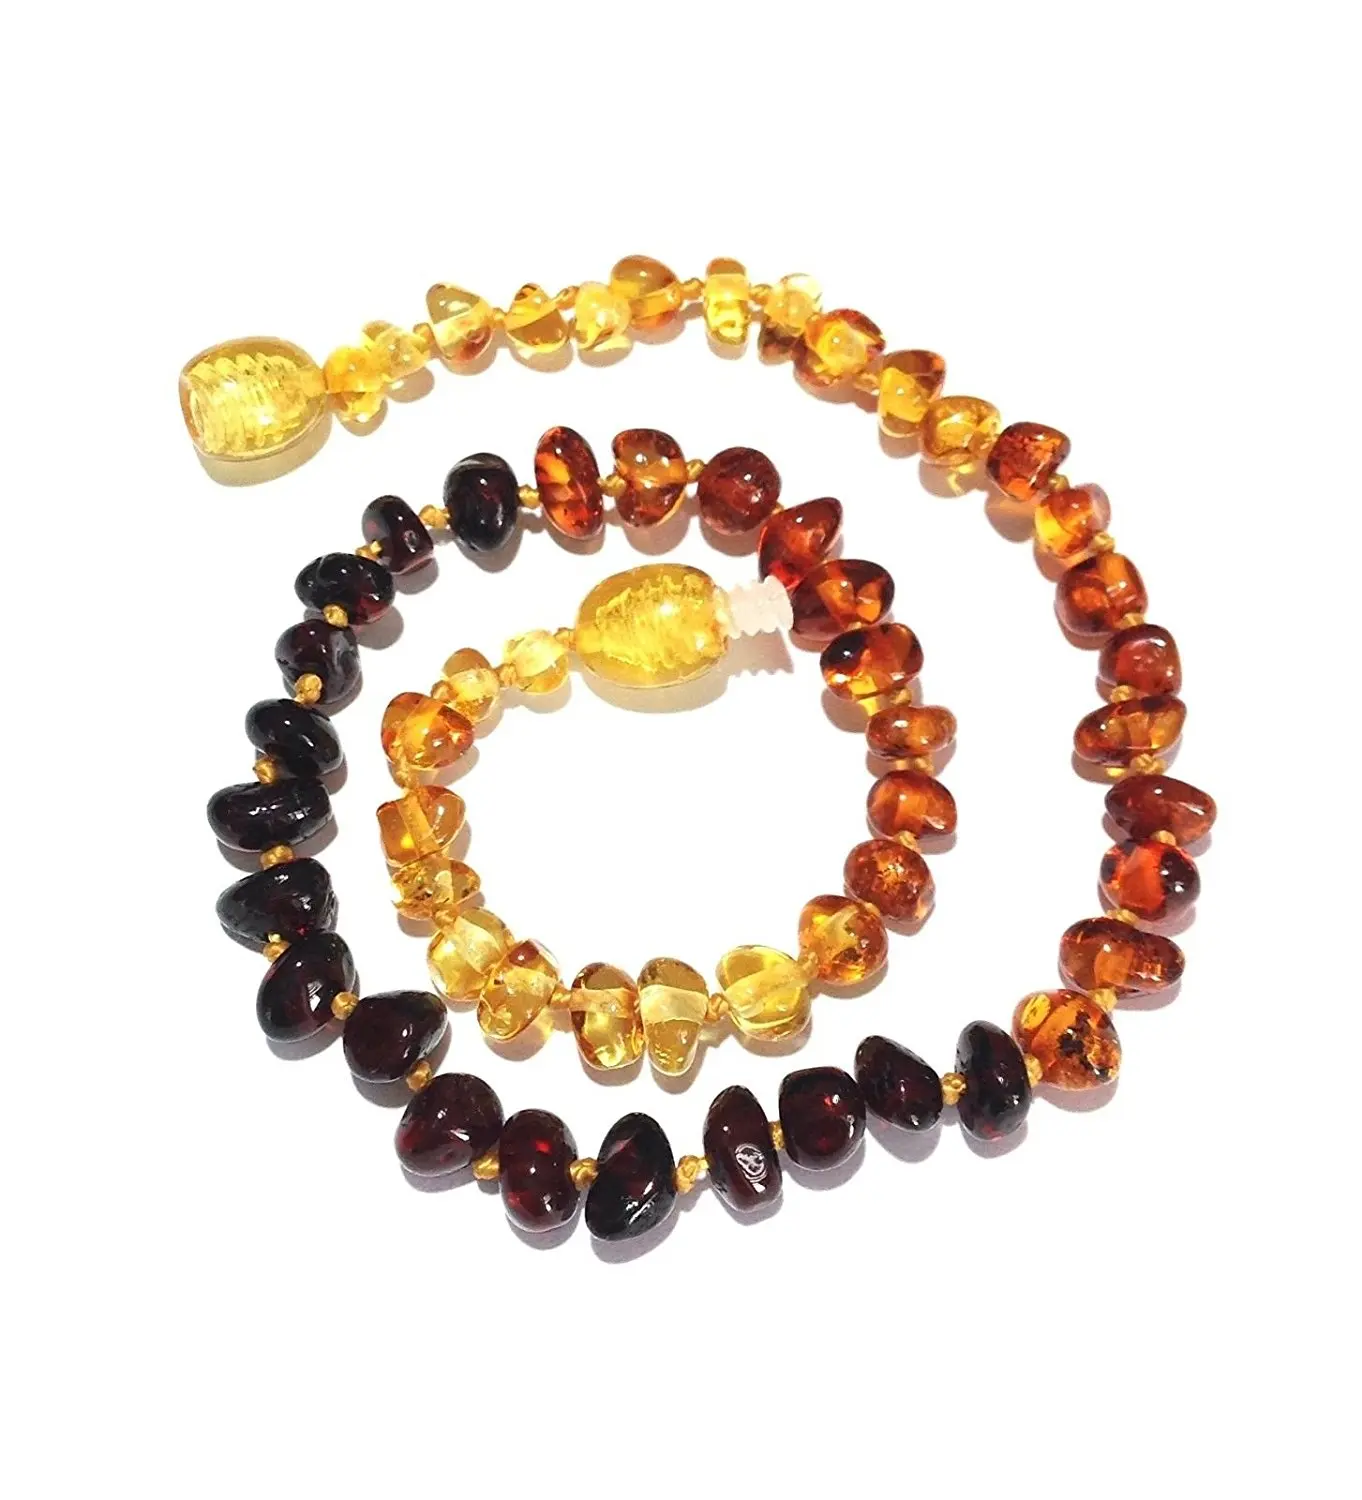 AmberJewelry Baltic Amber Teething Bracelet//Anklet Hand-Made from Certified Natural Olive Style Baltic Amber Beads Bracelet for Baby and Child 4.7 inch , Rainbow 12cm